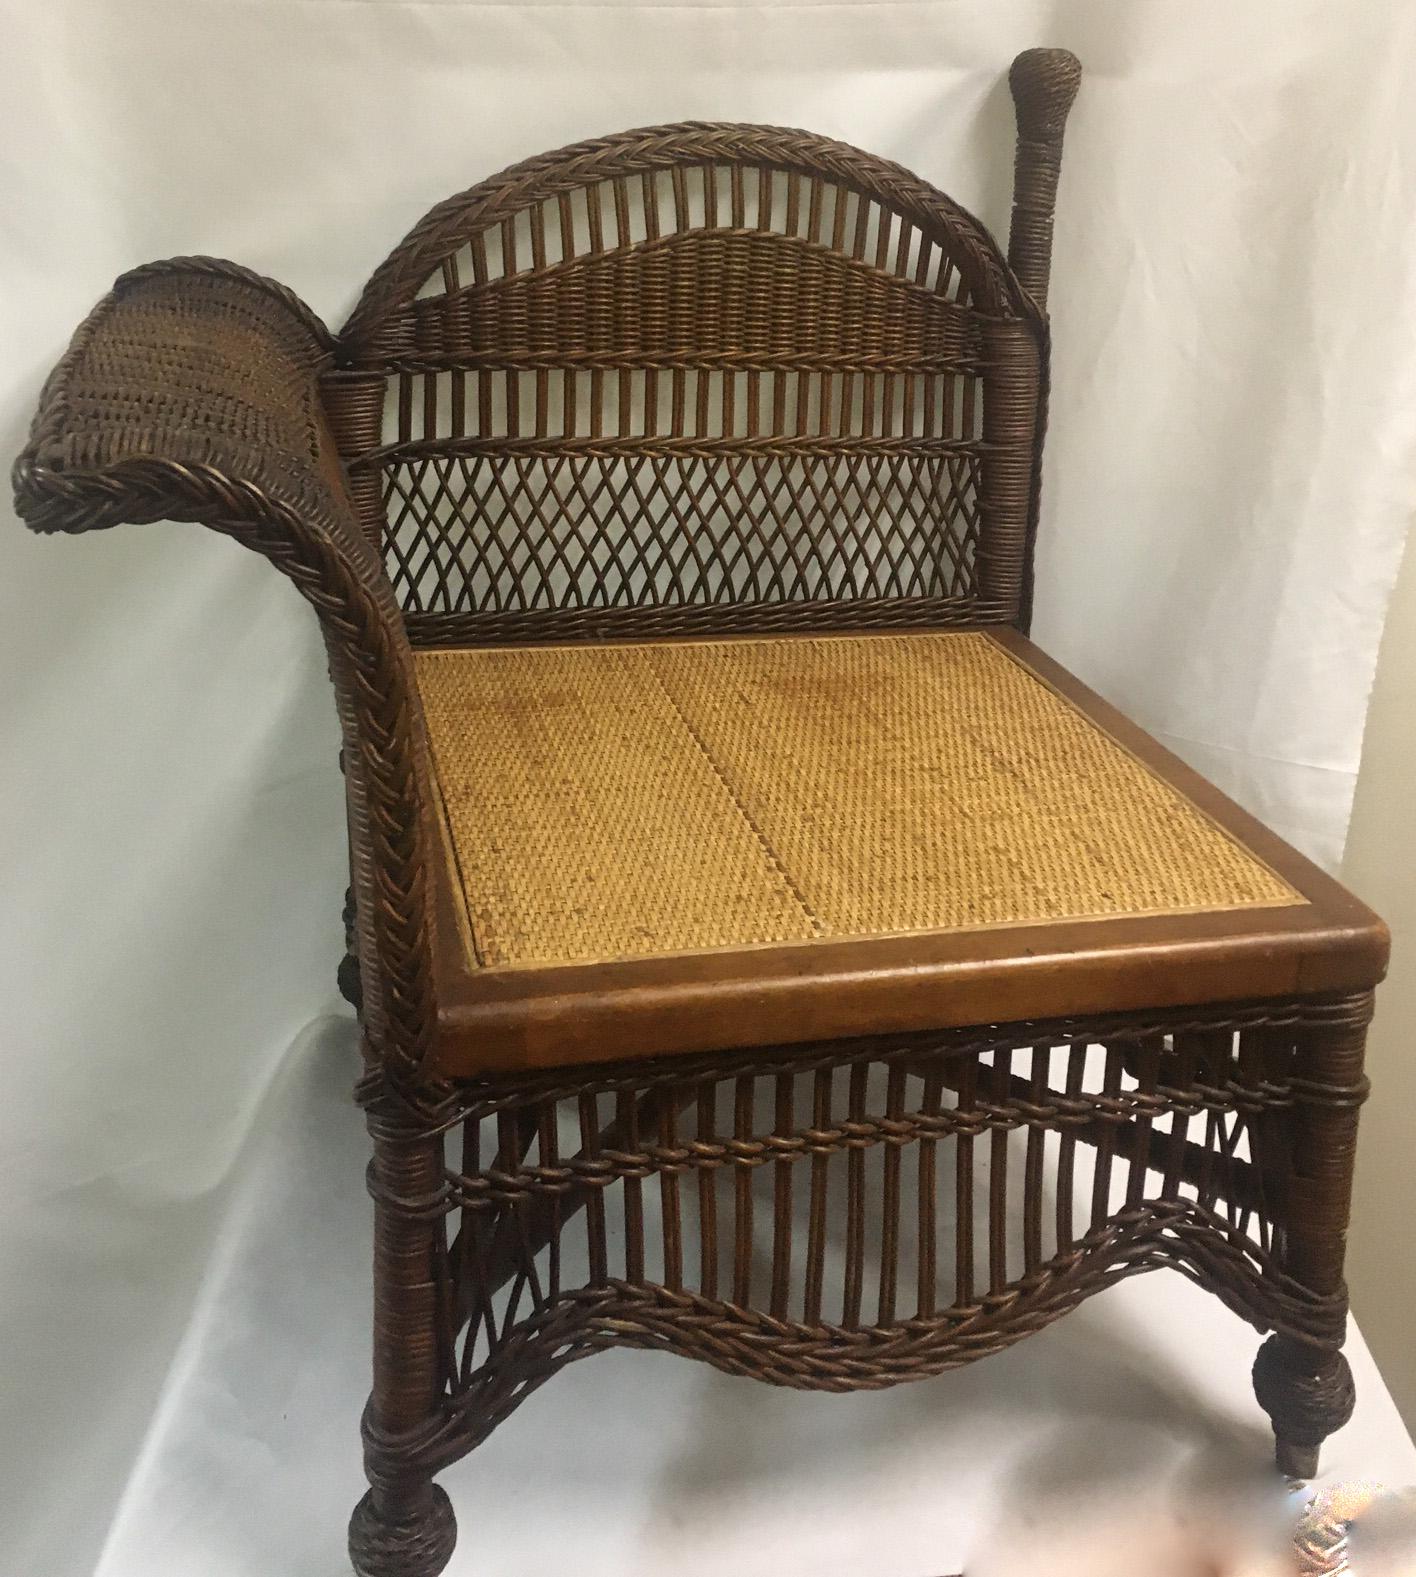 Antique Wicker Heywood Wakefield Corner or Photographer's Chair For Sale 1